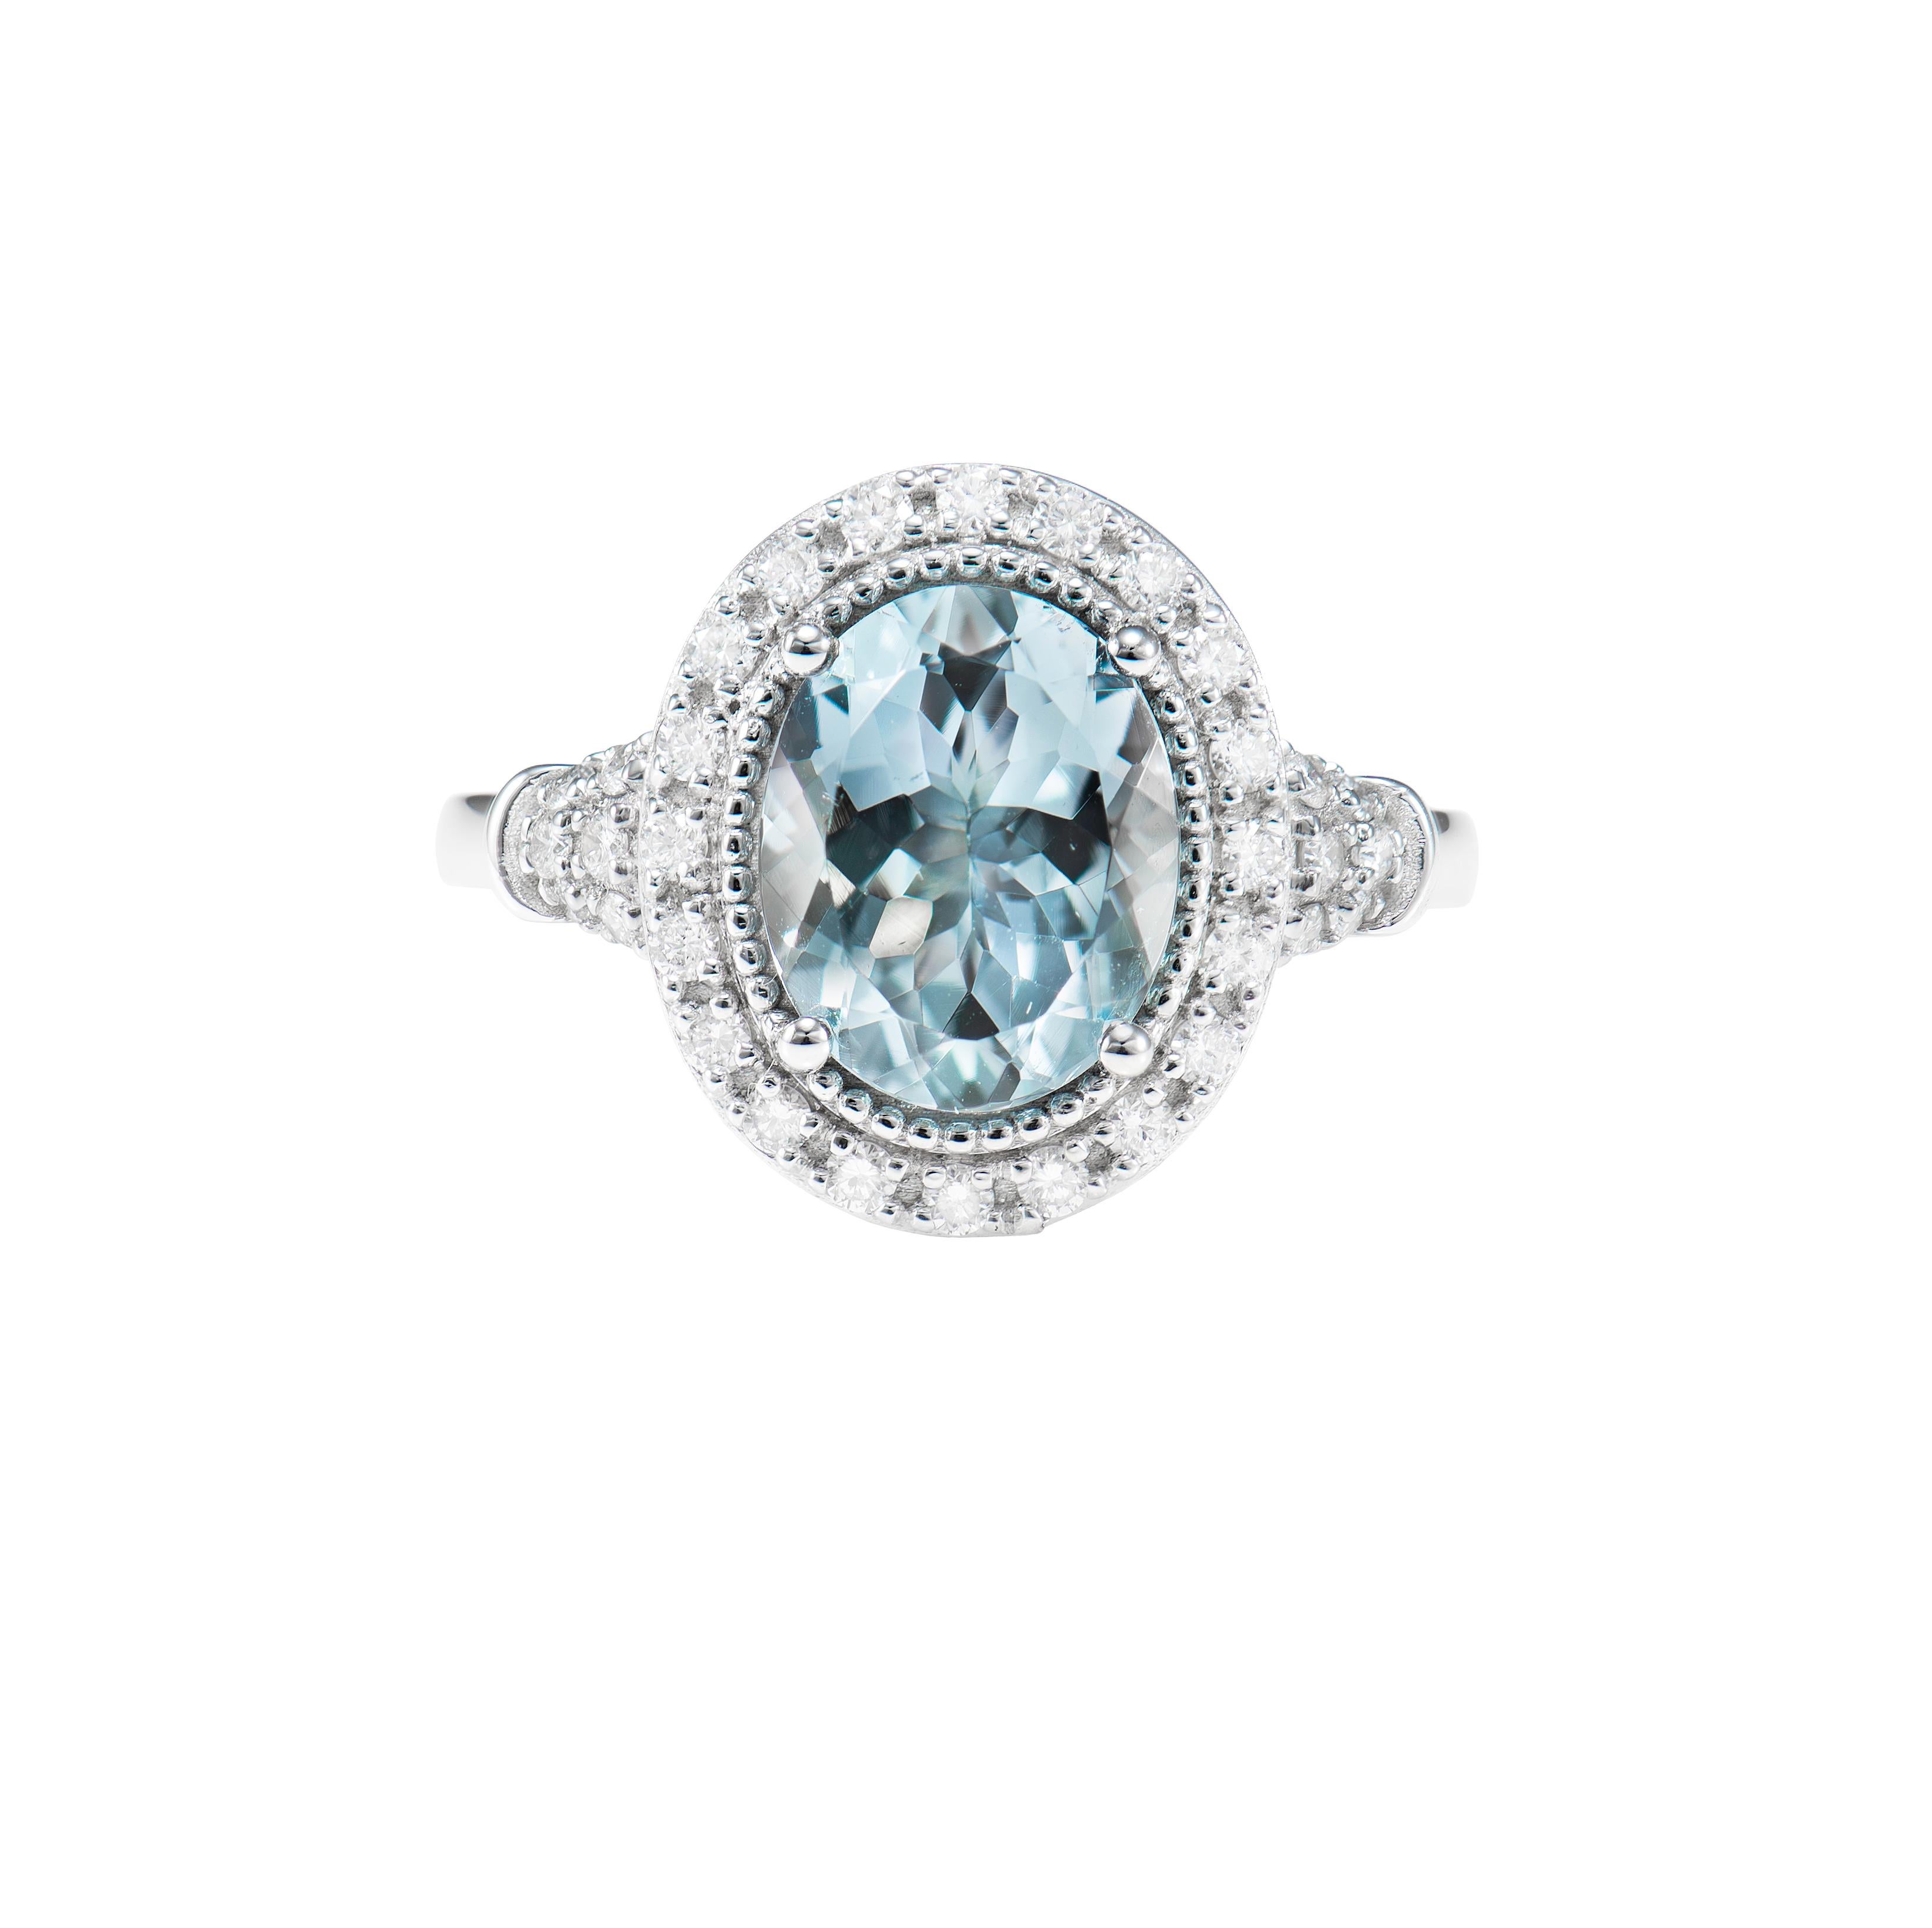 Contemporary Aquamarine and White Diamond Ring in 18 Karat White Gold. For Sale